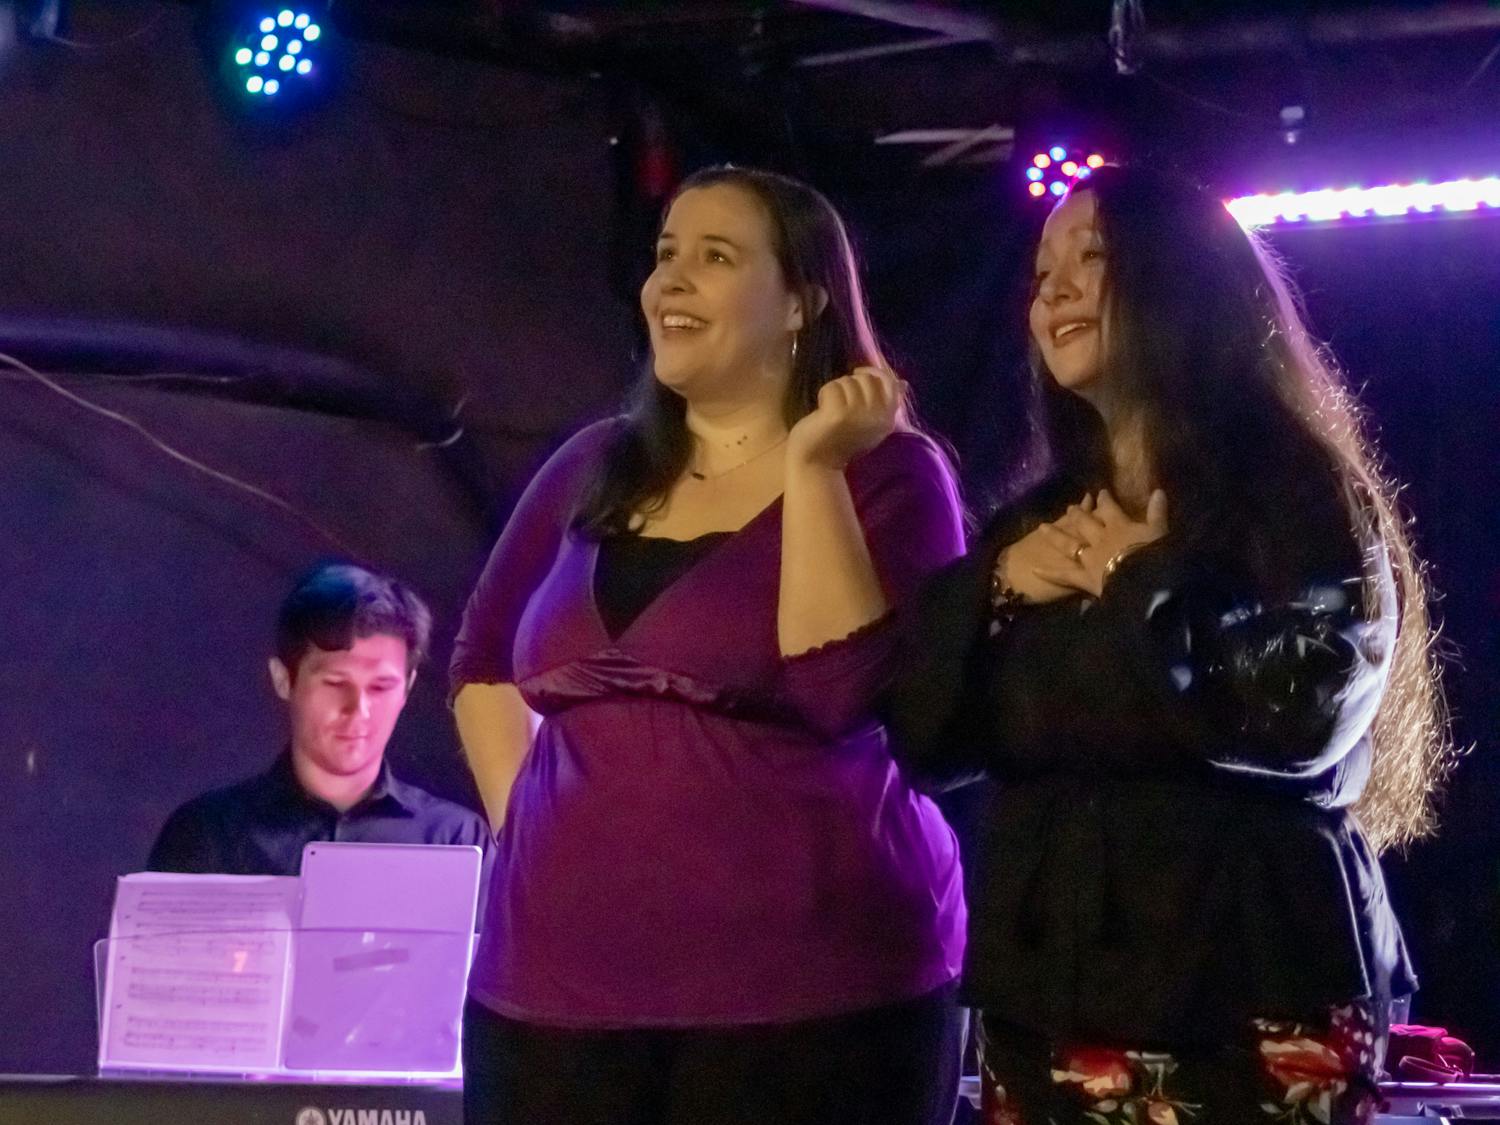 Maria Beery (left) and Jennifer Mitchell (right) sing about their respective love lives during the performance of "Four Singers Walk Into A Bar" on March 26, 2023. They performed at New Brookland Tavern and various local bars in the Columbia area.